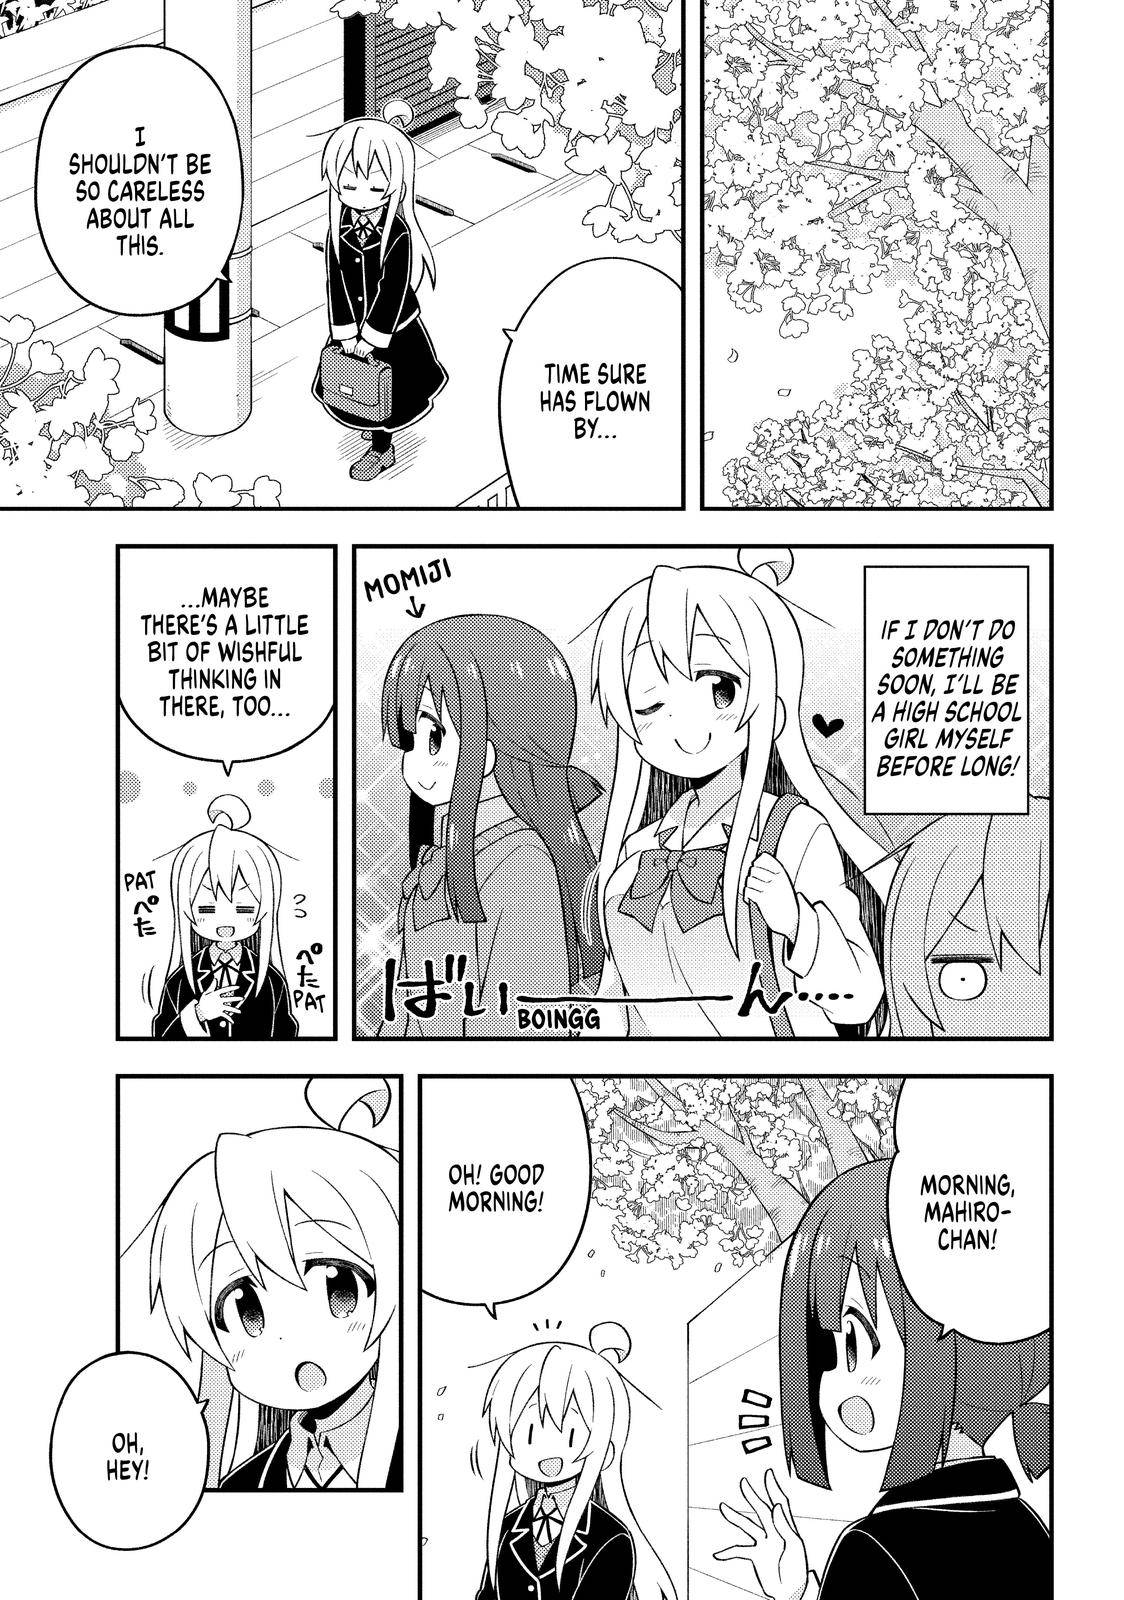 ONIMAI - I'm Now Your Sister! - chapter 39 - #3